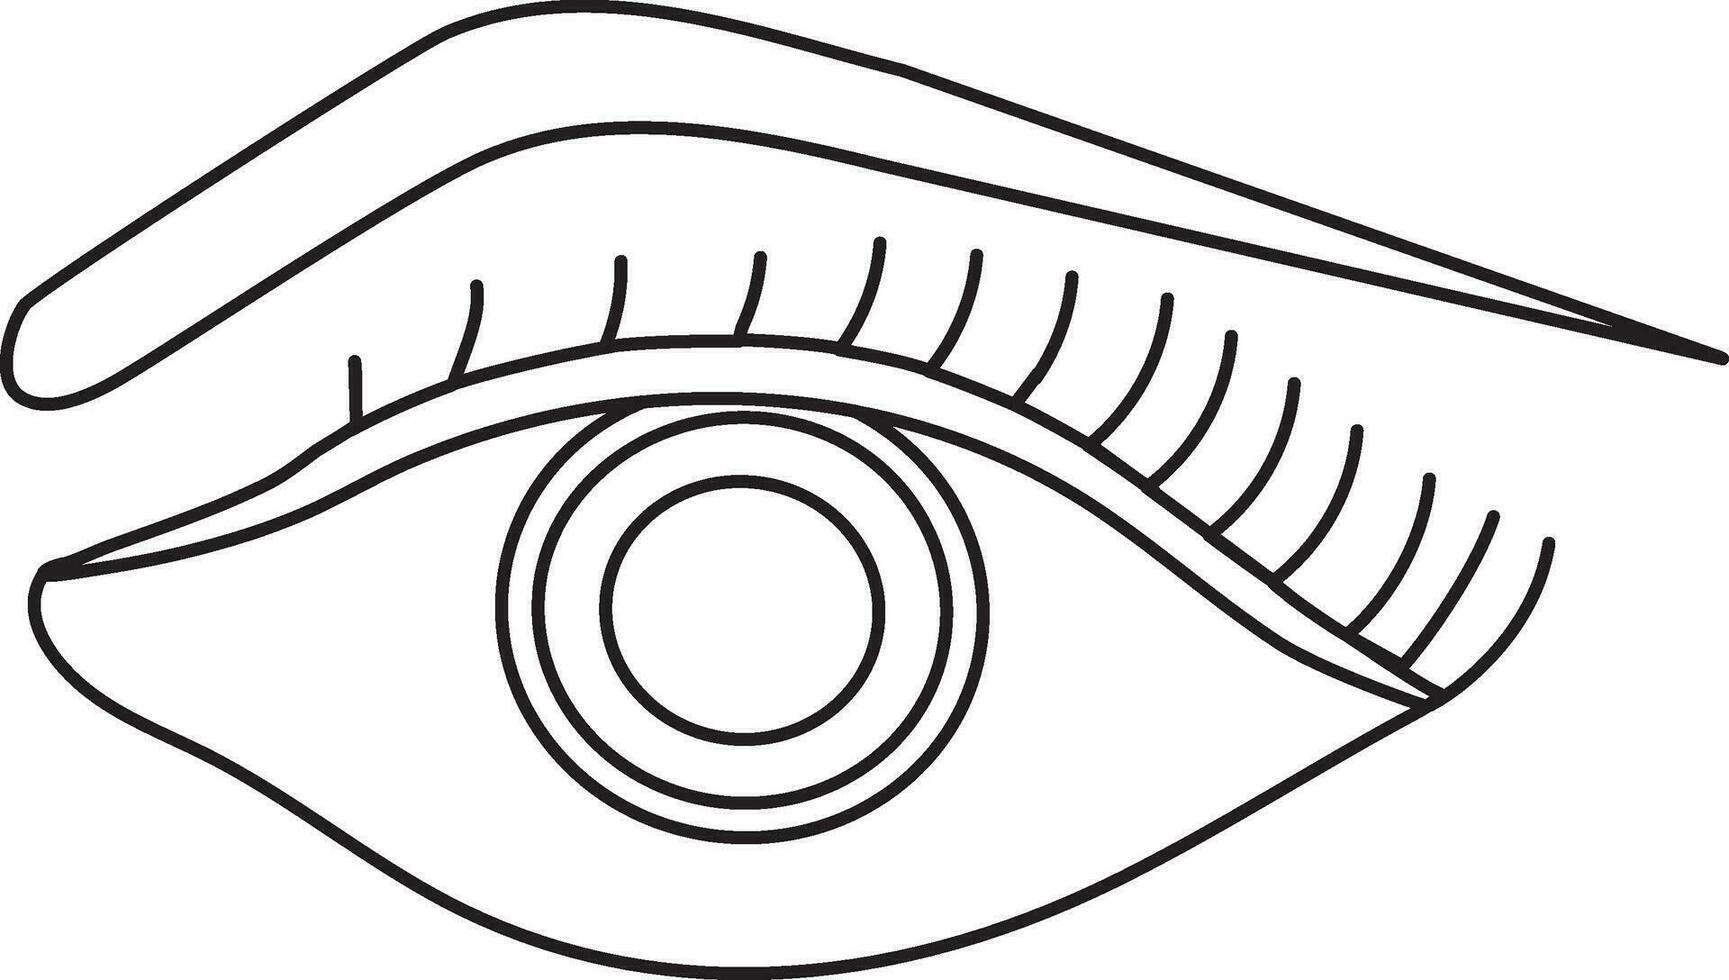 Stroke style of eye icon with eyebrow for human body. vector